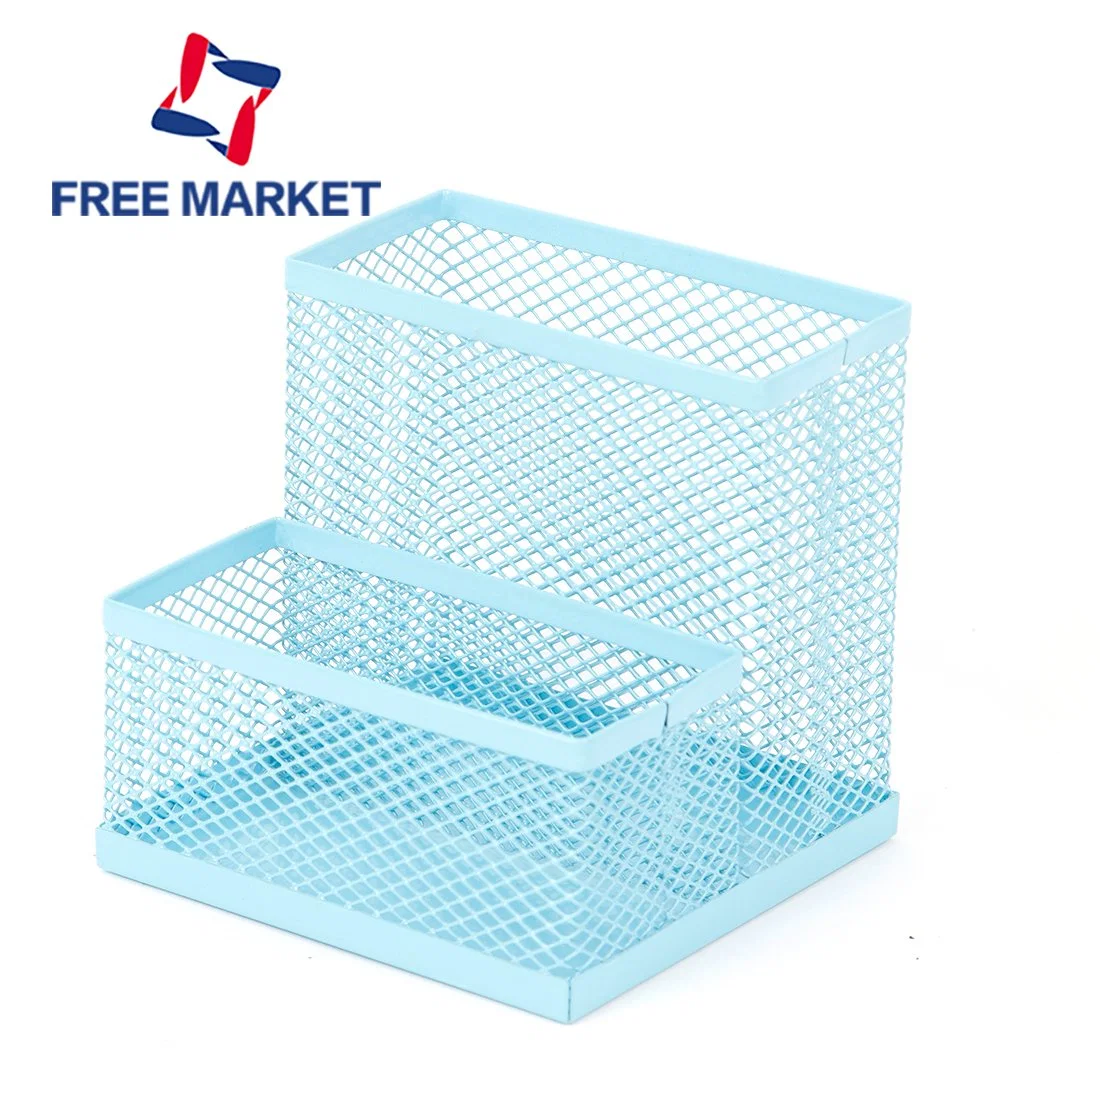 Desk Drawer Organizer Metal Mesh Drawer Organizer Tray for Office or Home Supplies Desktop Storage Stationery, 2 Compartments